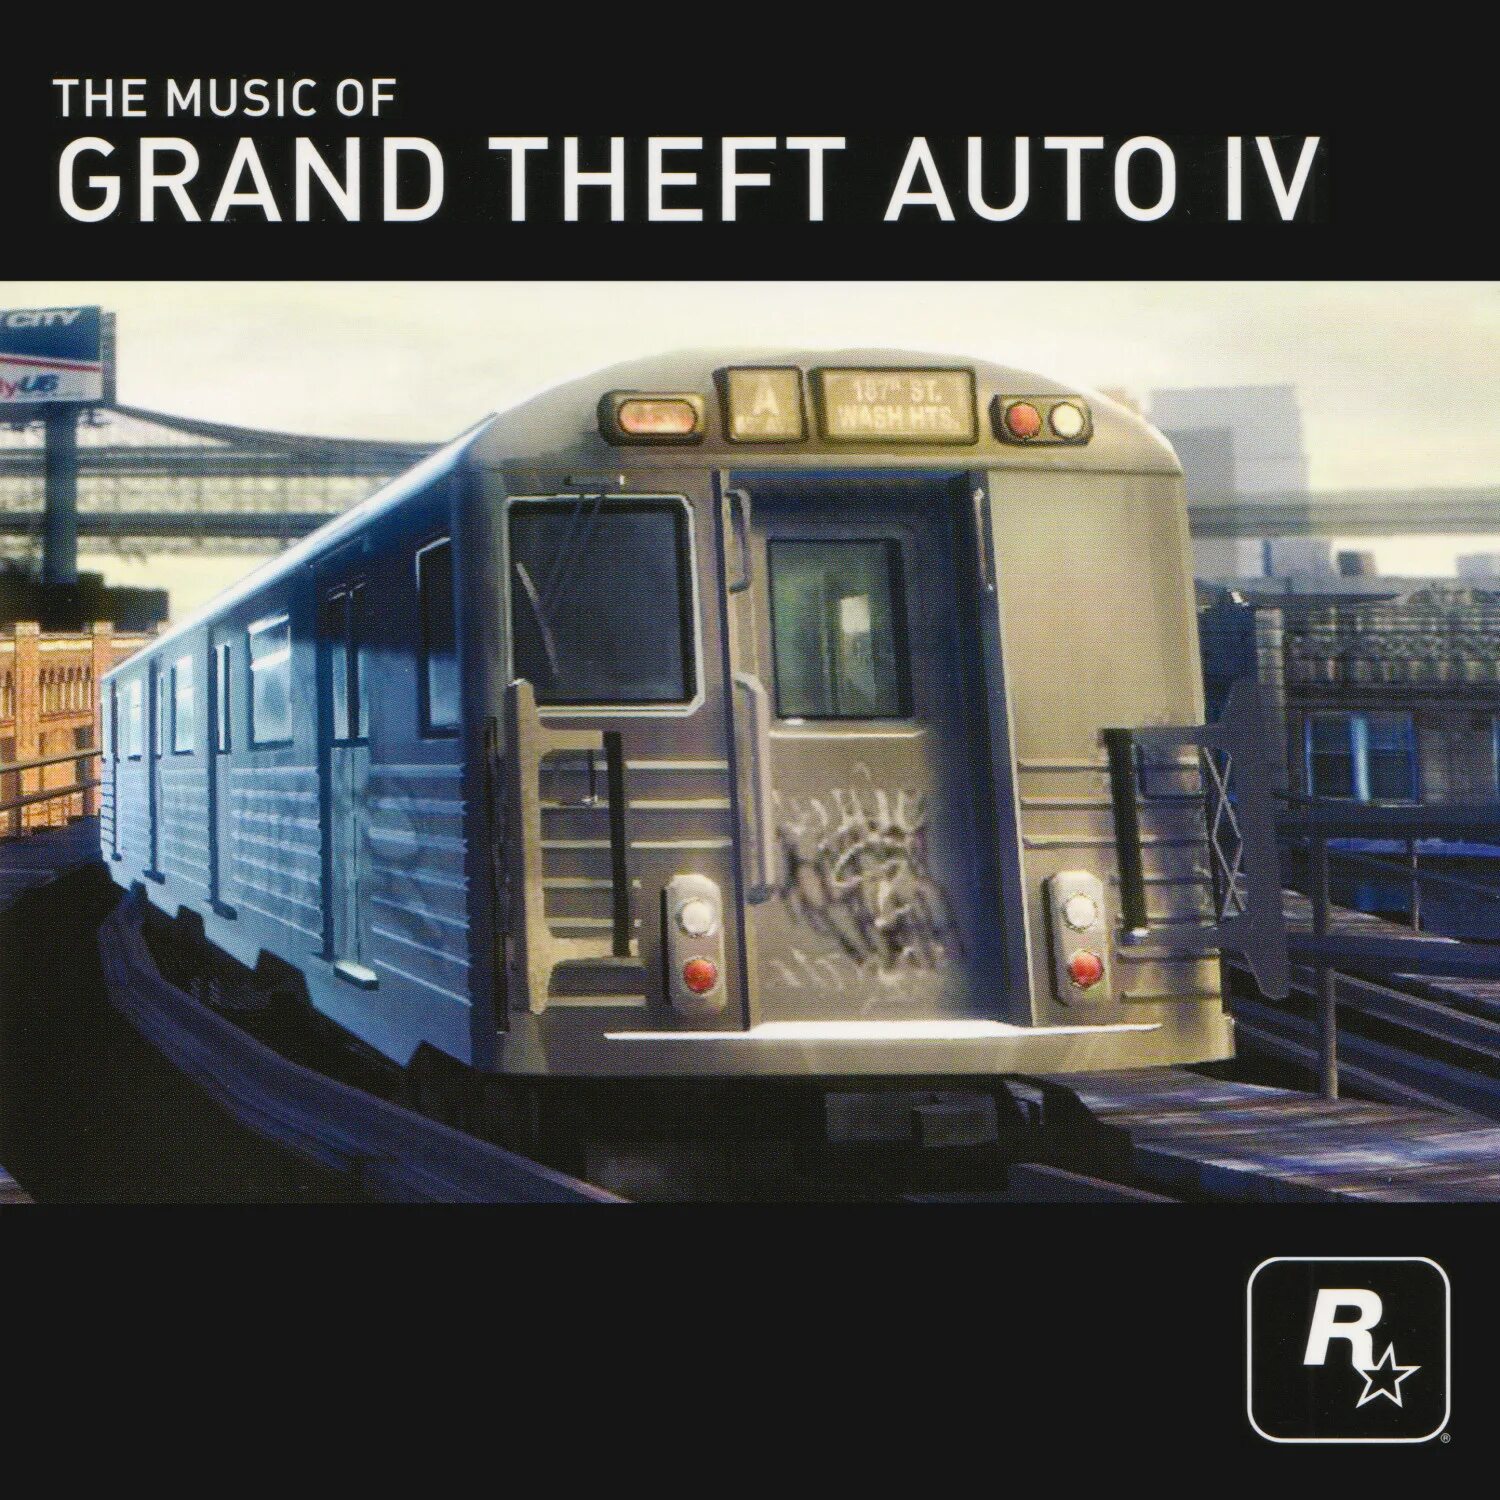 The Music of Grand Theft auto IV. Vagabond Greenskeepers GTA 4 обложка. Soviet connection обложка. Michael Hunter Grand Theft. Soviet connection gta